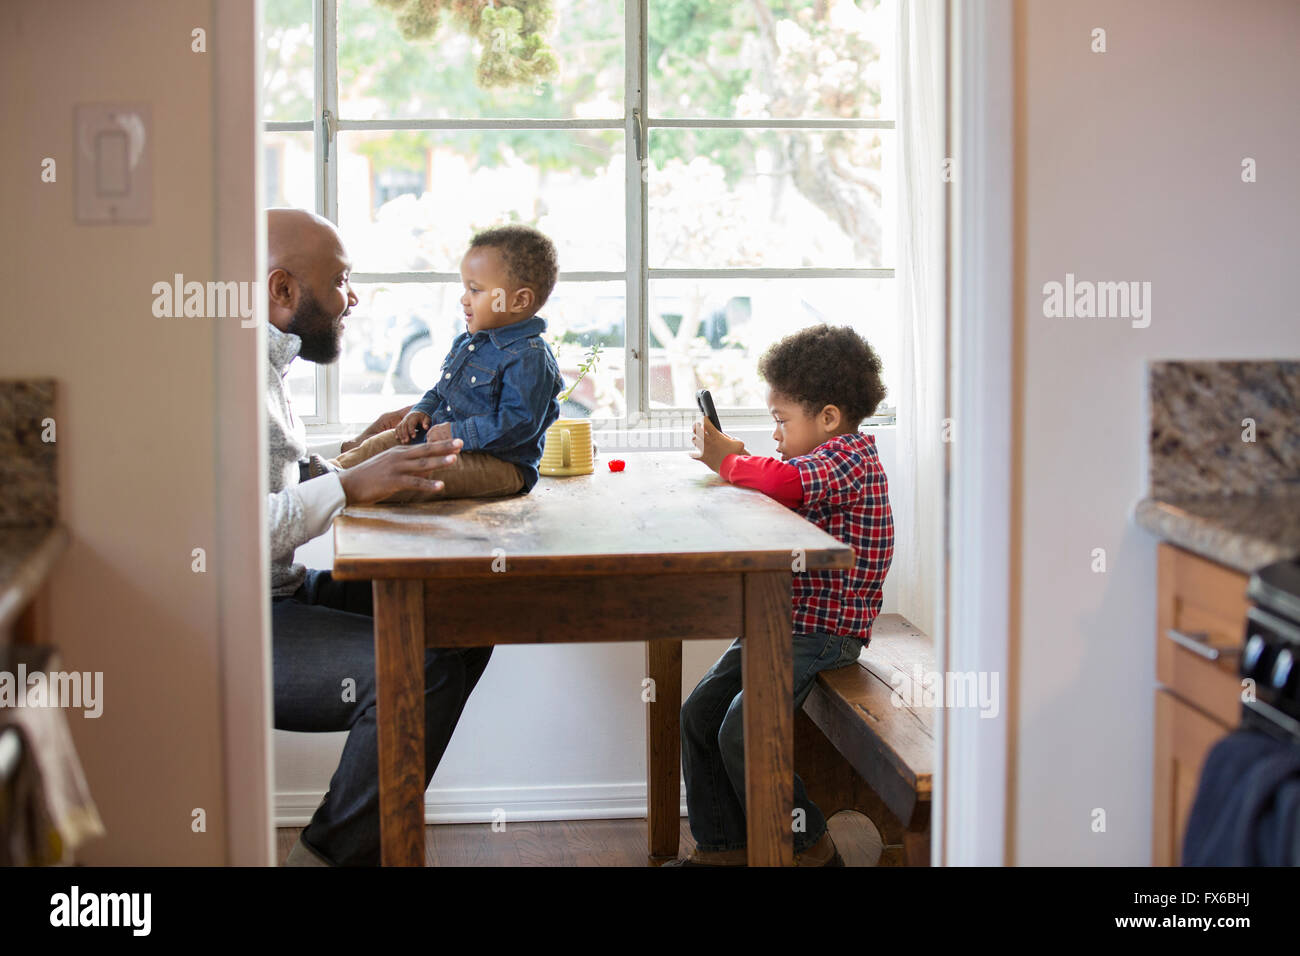 Father and children sitting at table Stock Photo